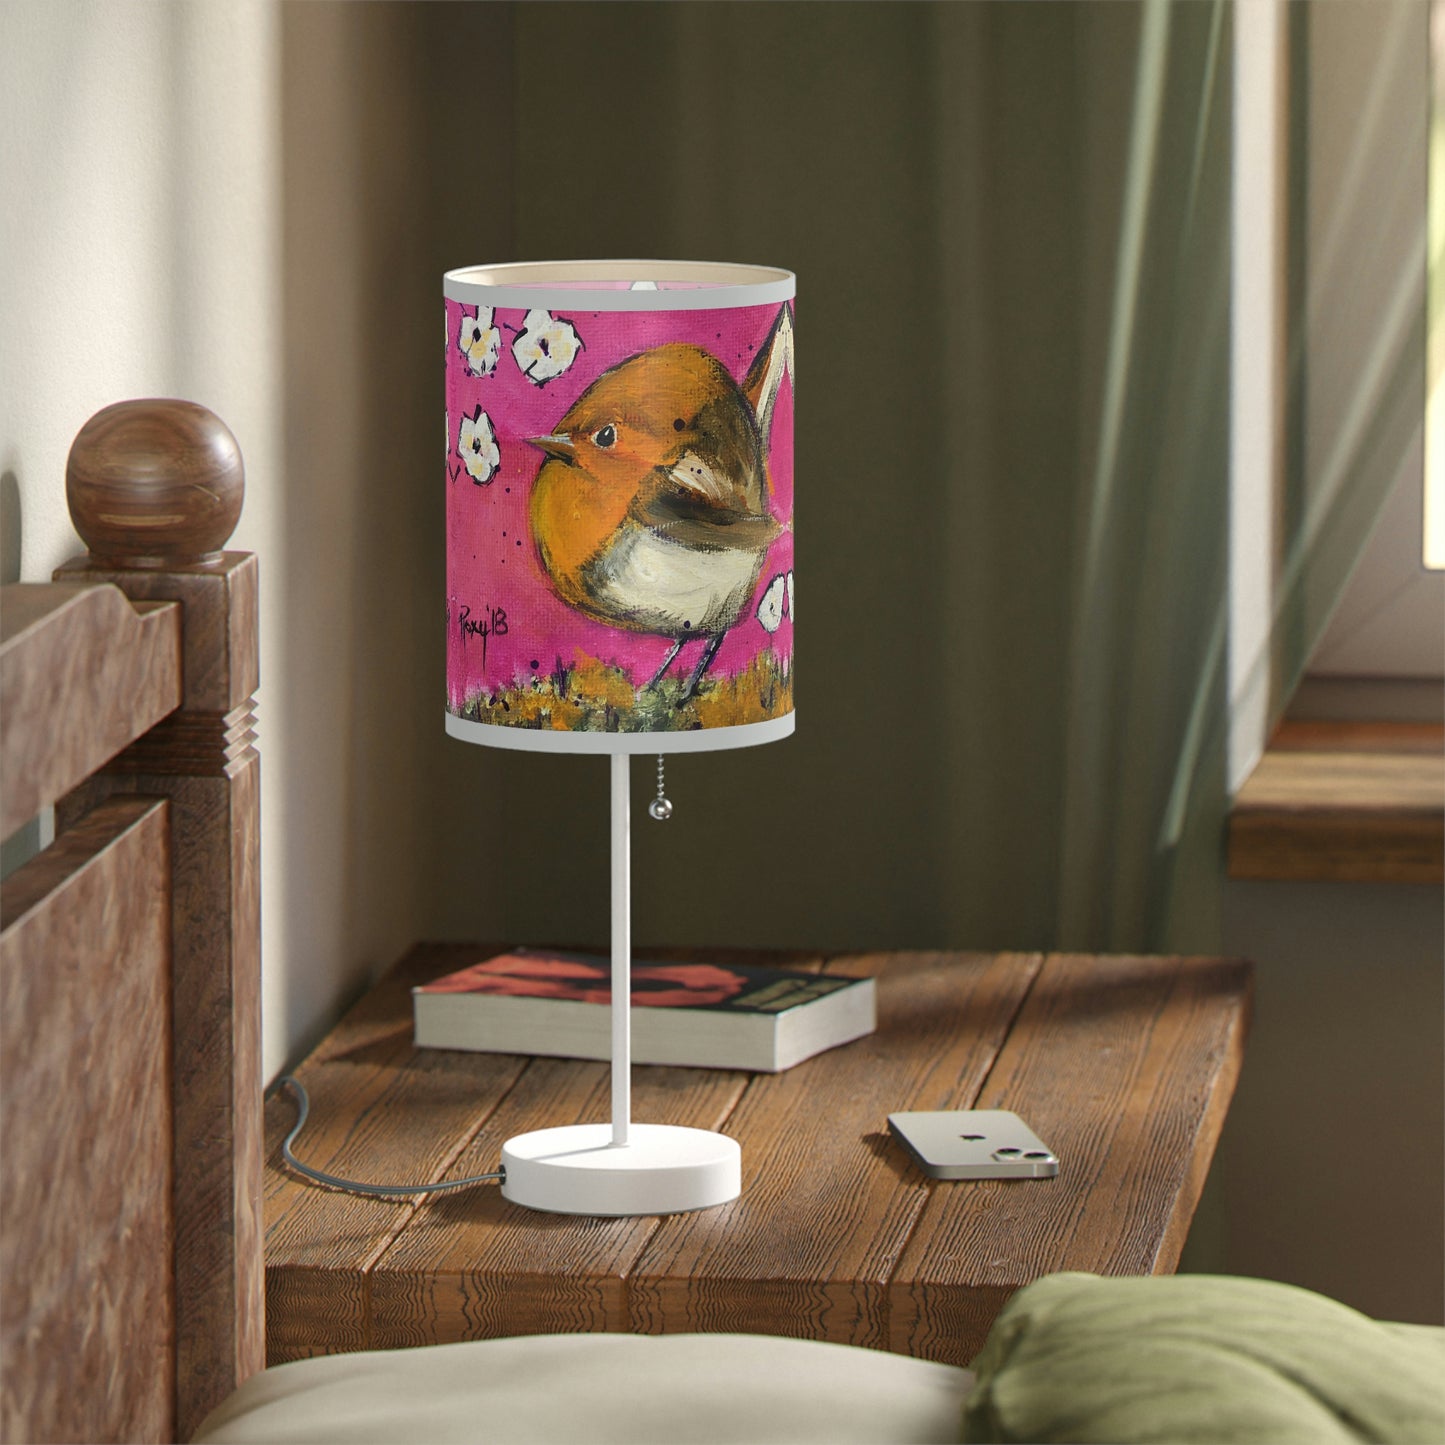 Whimsical Wren Pink Lamp on a Stand, US|CA plug